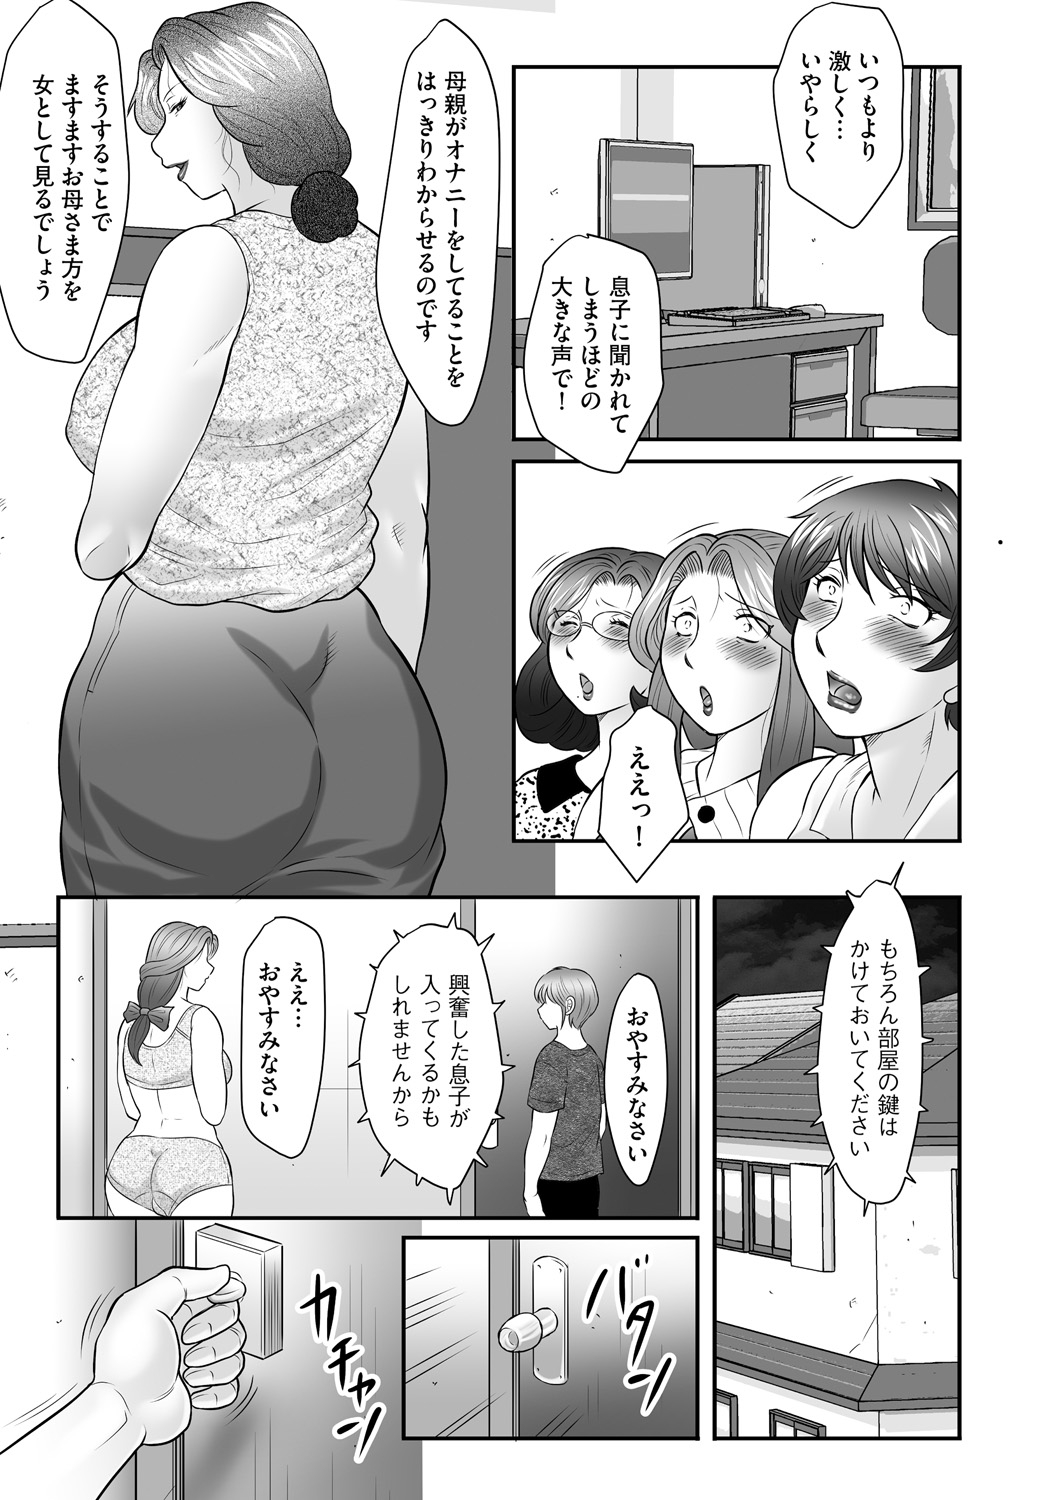 [Fuusen Club] Boshi no Susume - The advice of the mother and child Ch. 6 page 19 full